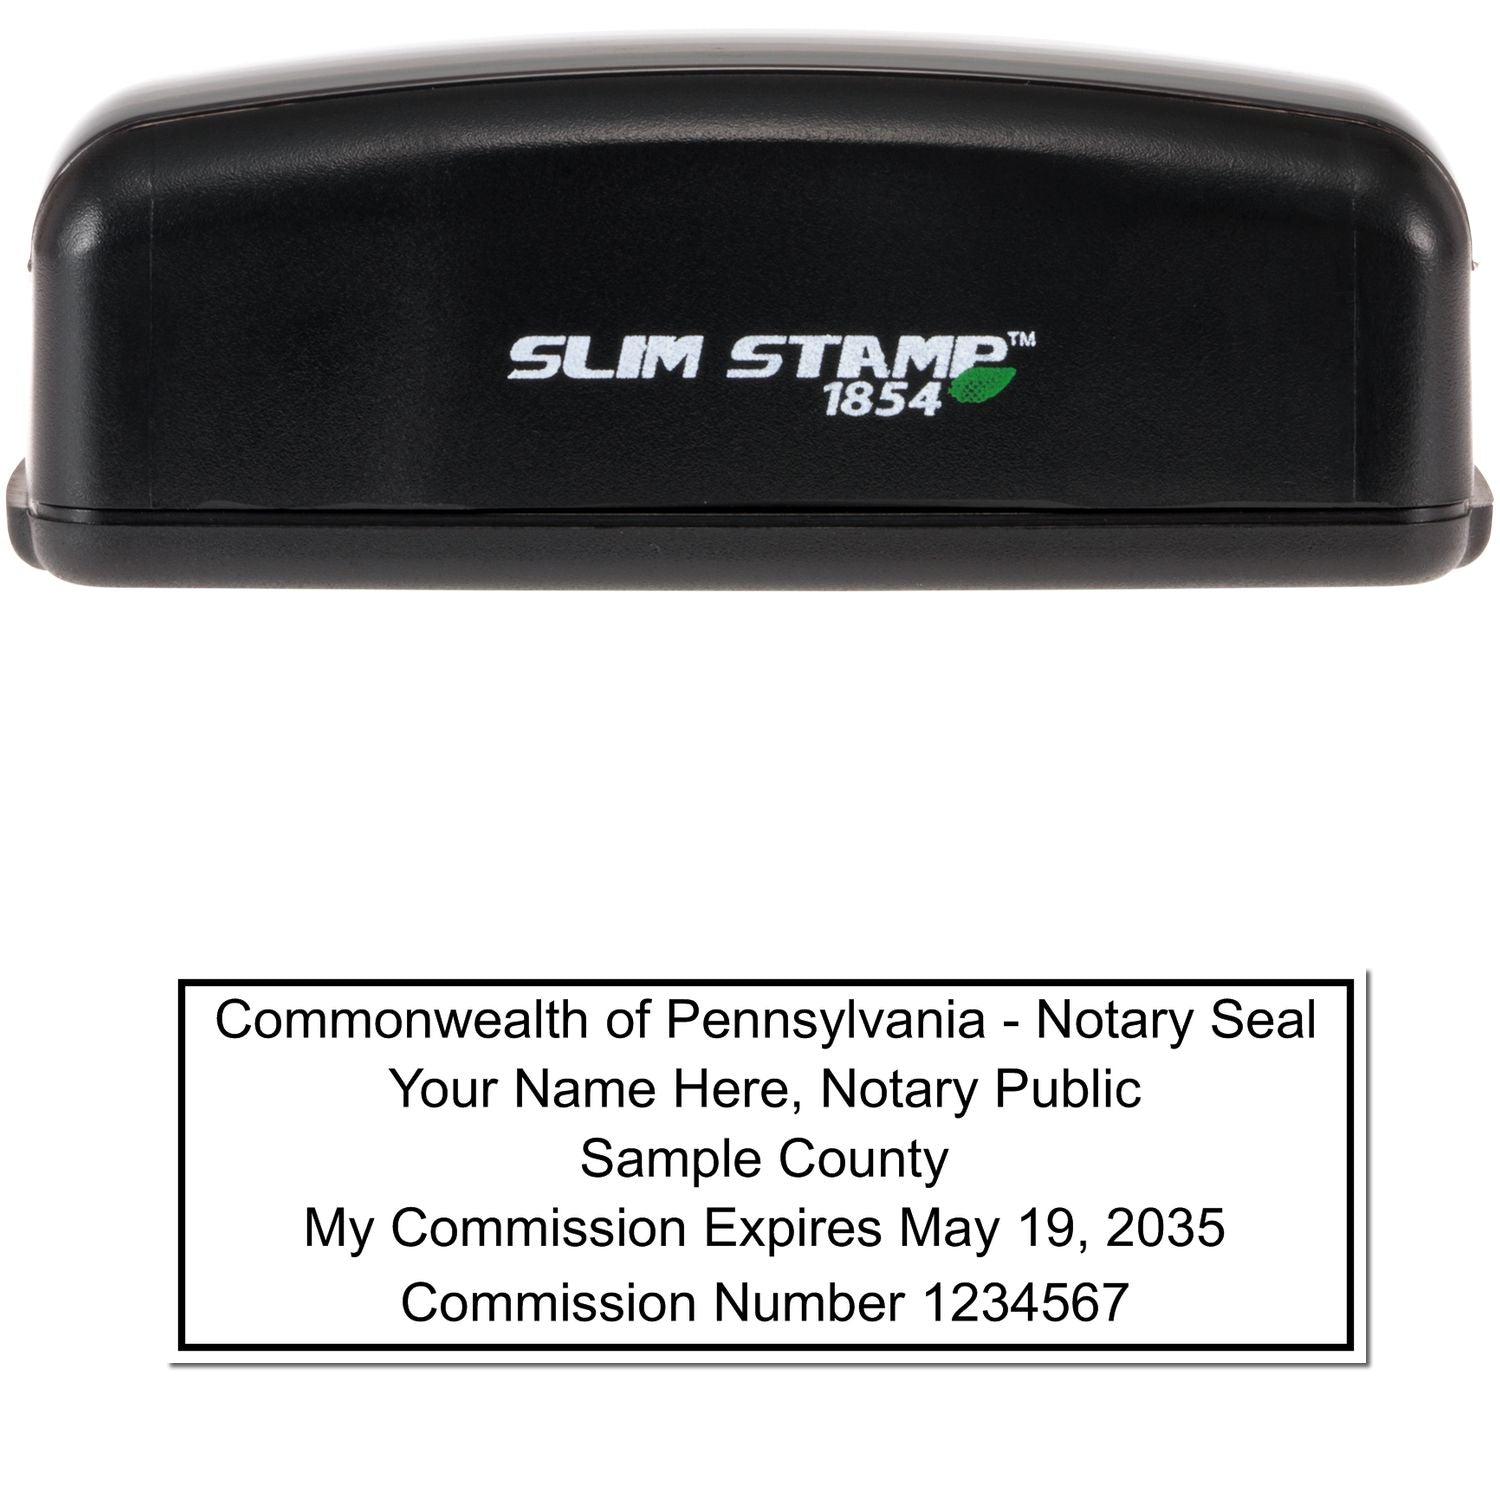 The main image for the Slim Pre-Inked Rectangular Notary Stamp for Pennsylvania depicting a sample of the imprint and electronic files